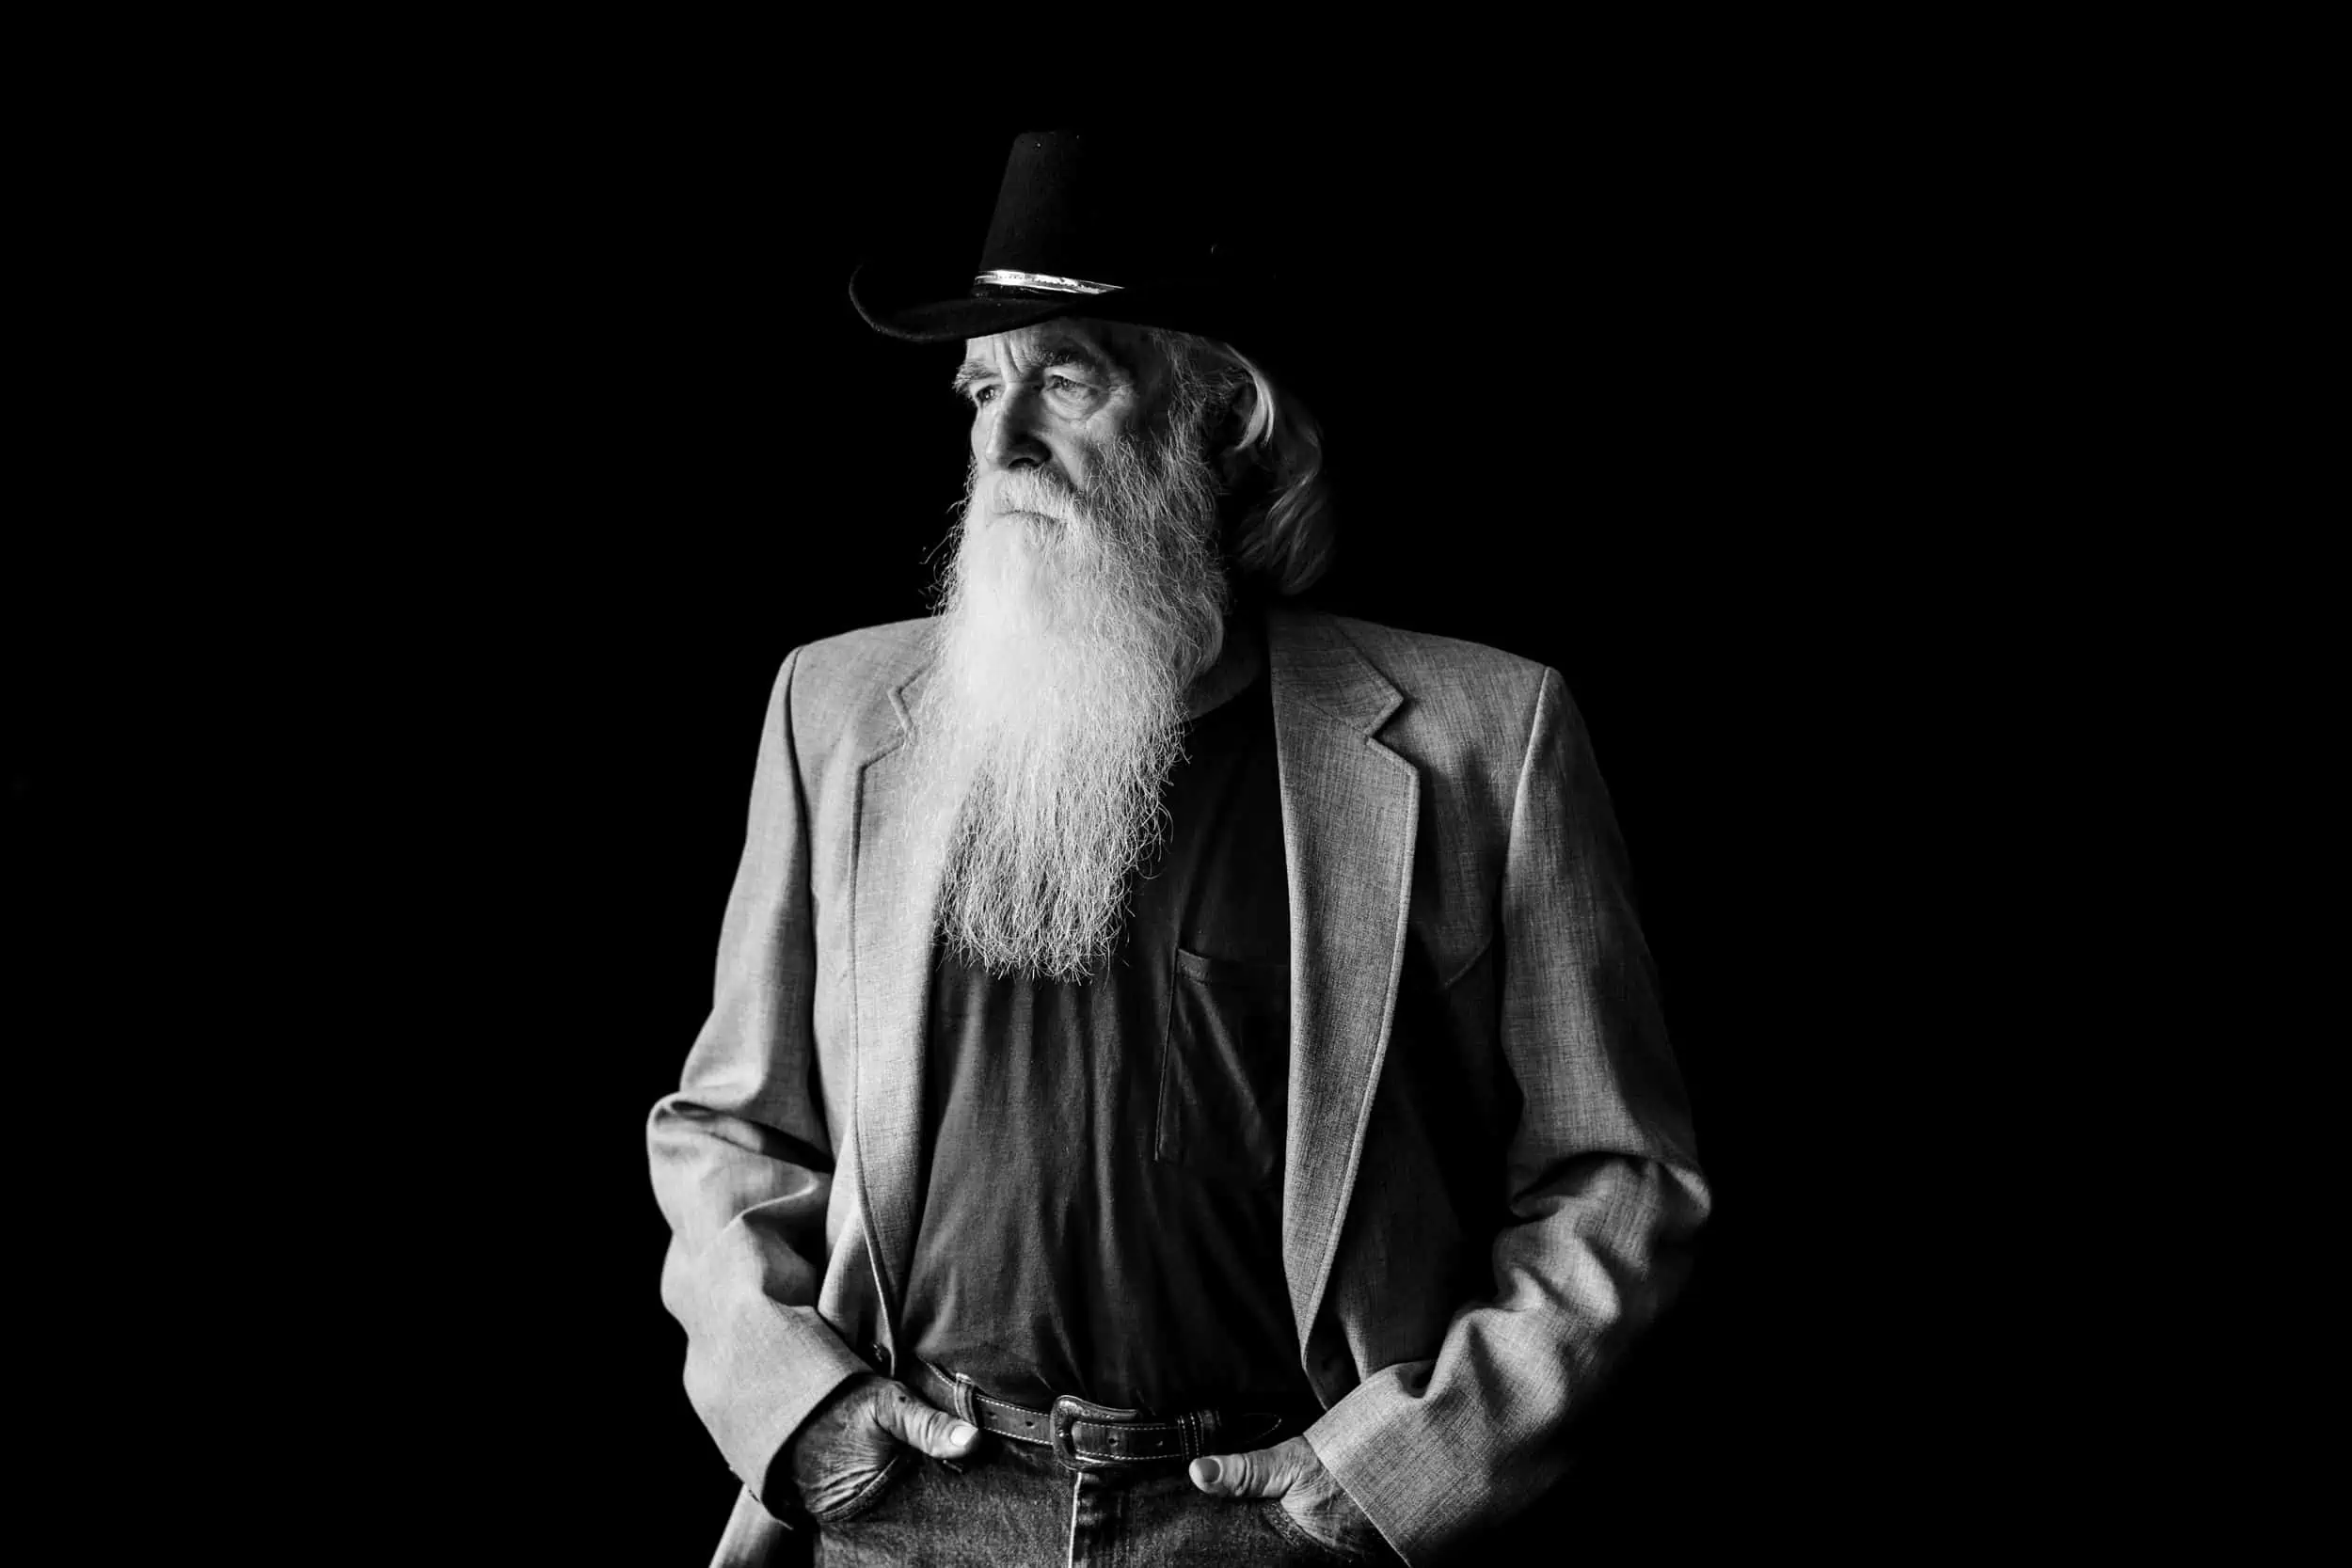 A black and white photo of a man with a long white beard.